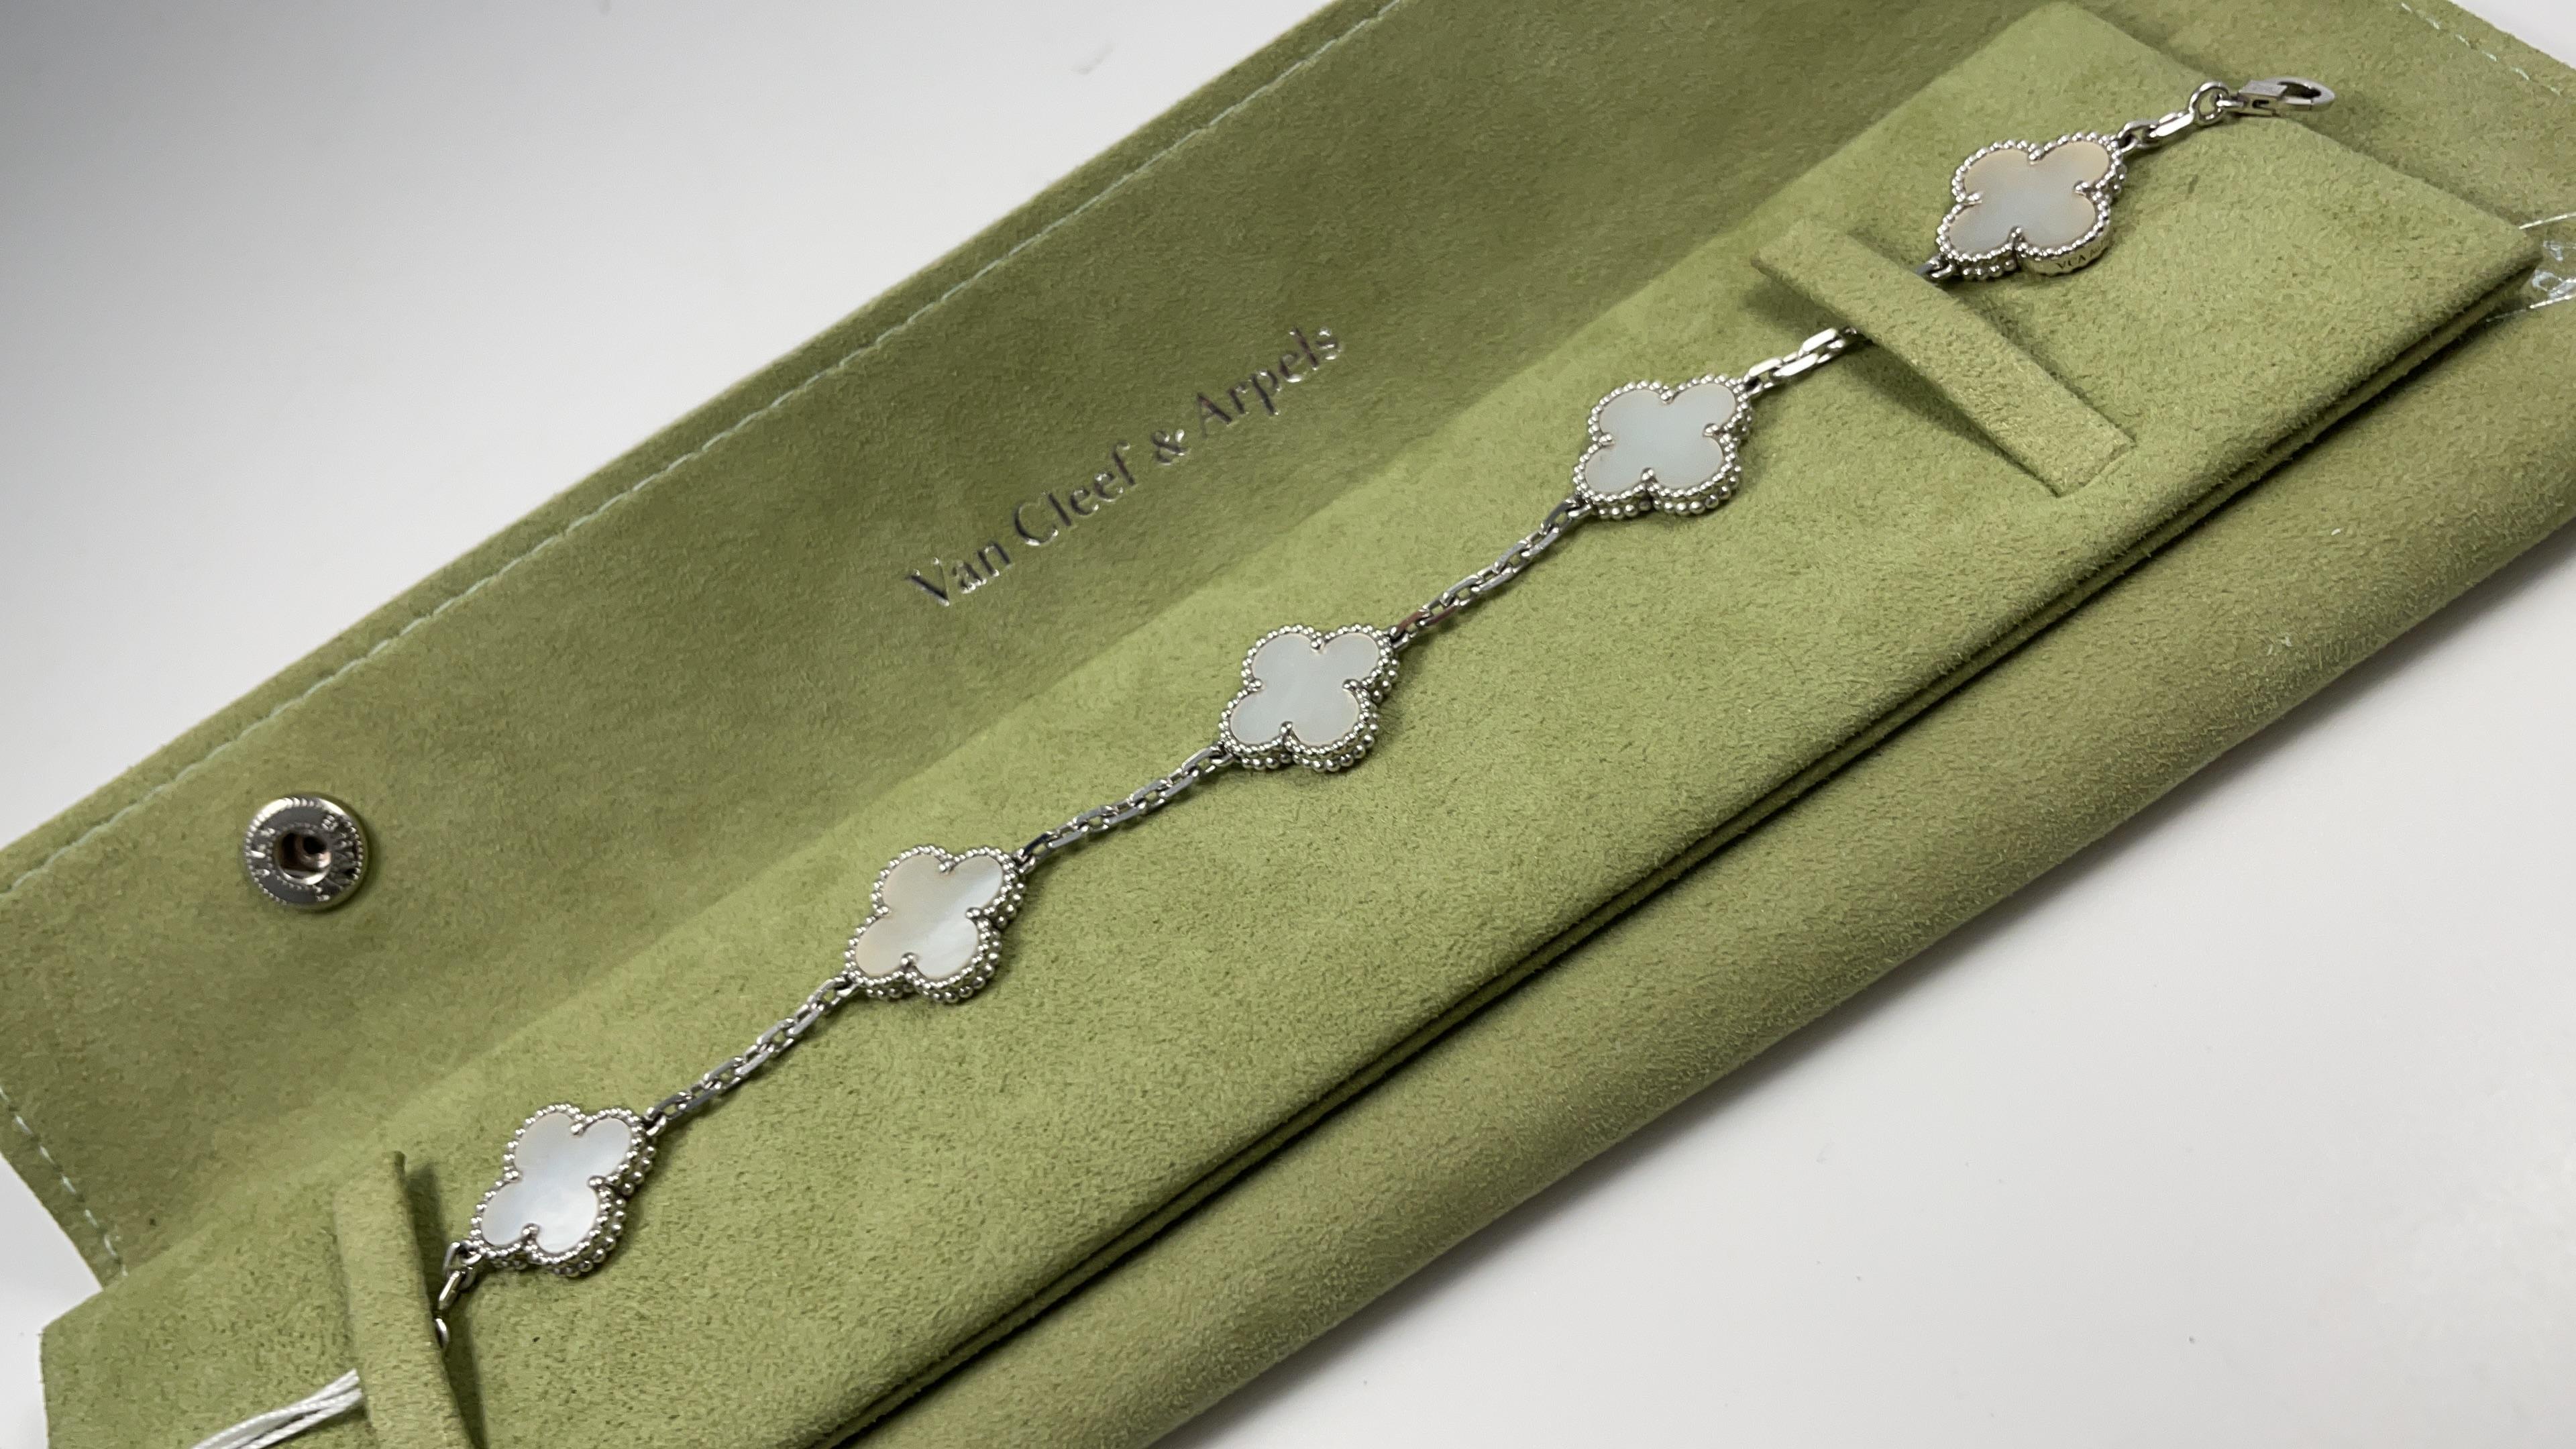 Designer:  Van Cleef & Arpels

Collection:  Vintage Alhambra

Style:  Bracelet

Metal Type: White Gold

Metal Purity: 18k

Bracelet Length : 7 inches

Total Item  Weight(Grams): XX

Hallmarks: VCA; Serial #; AU750

​Includes: 24 Month Brilliance